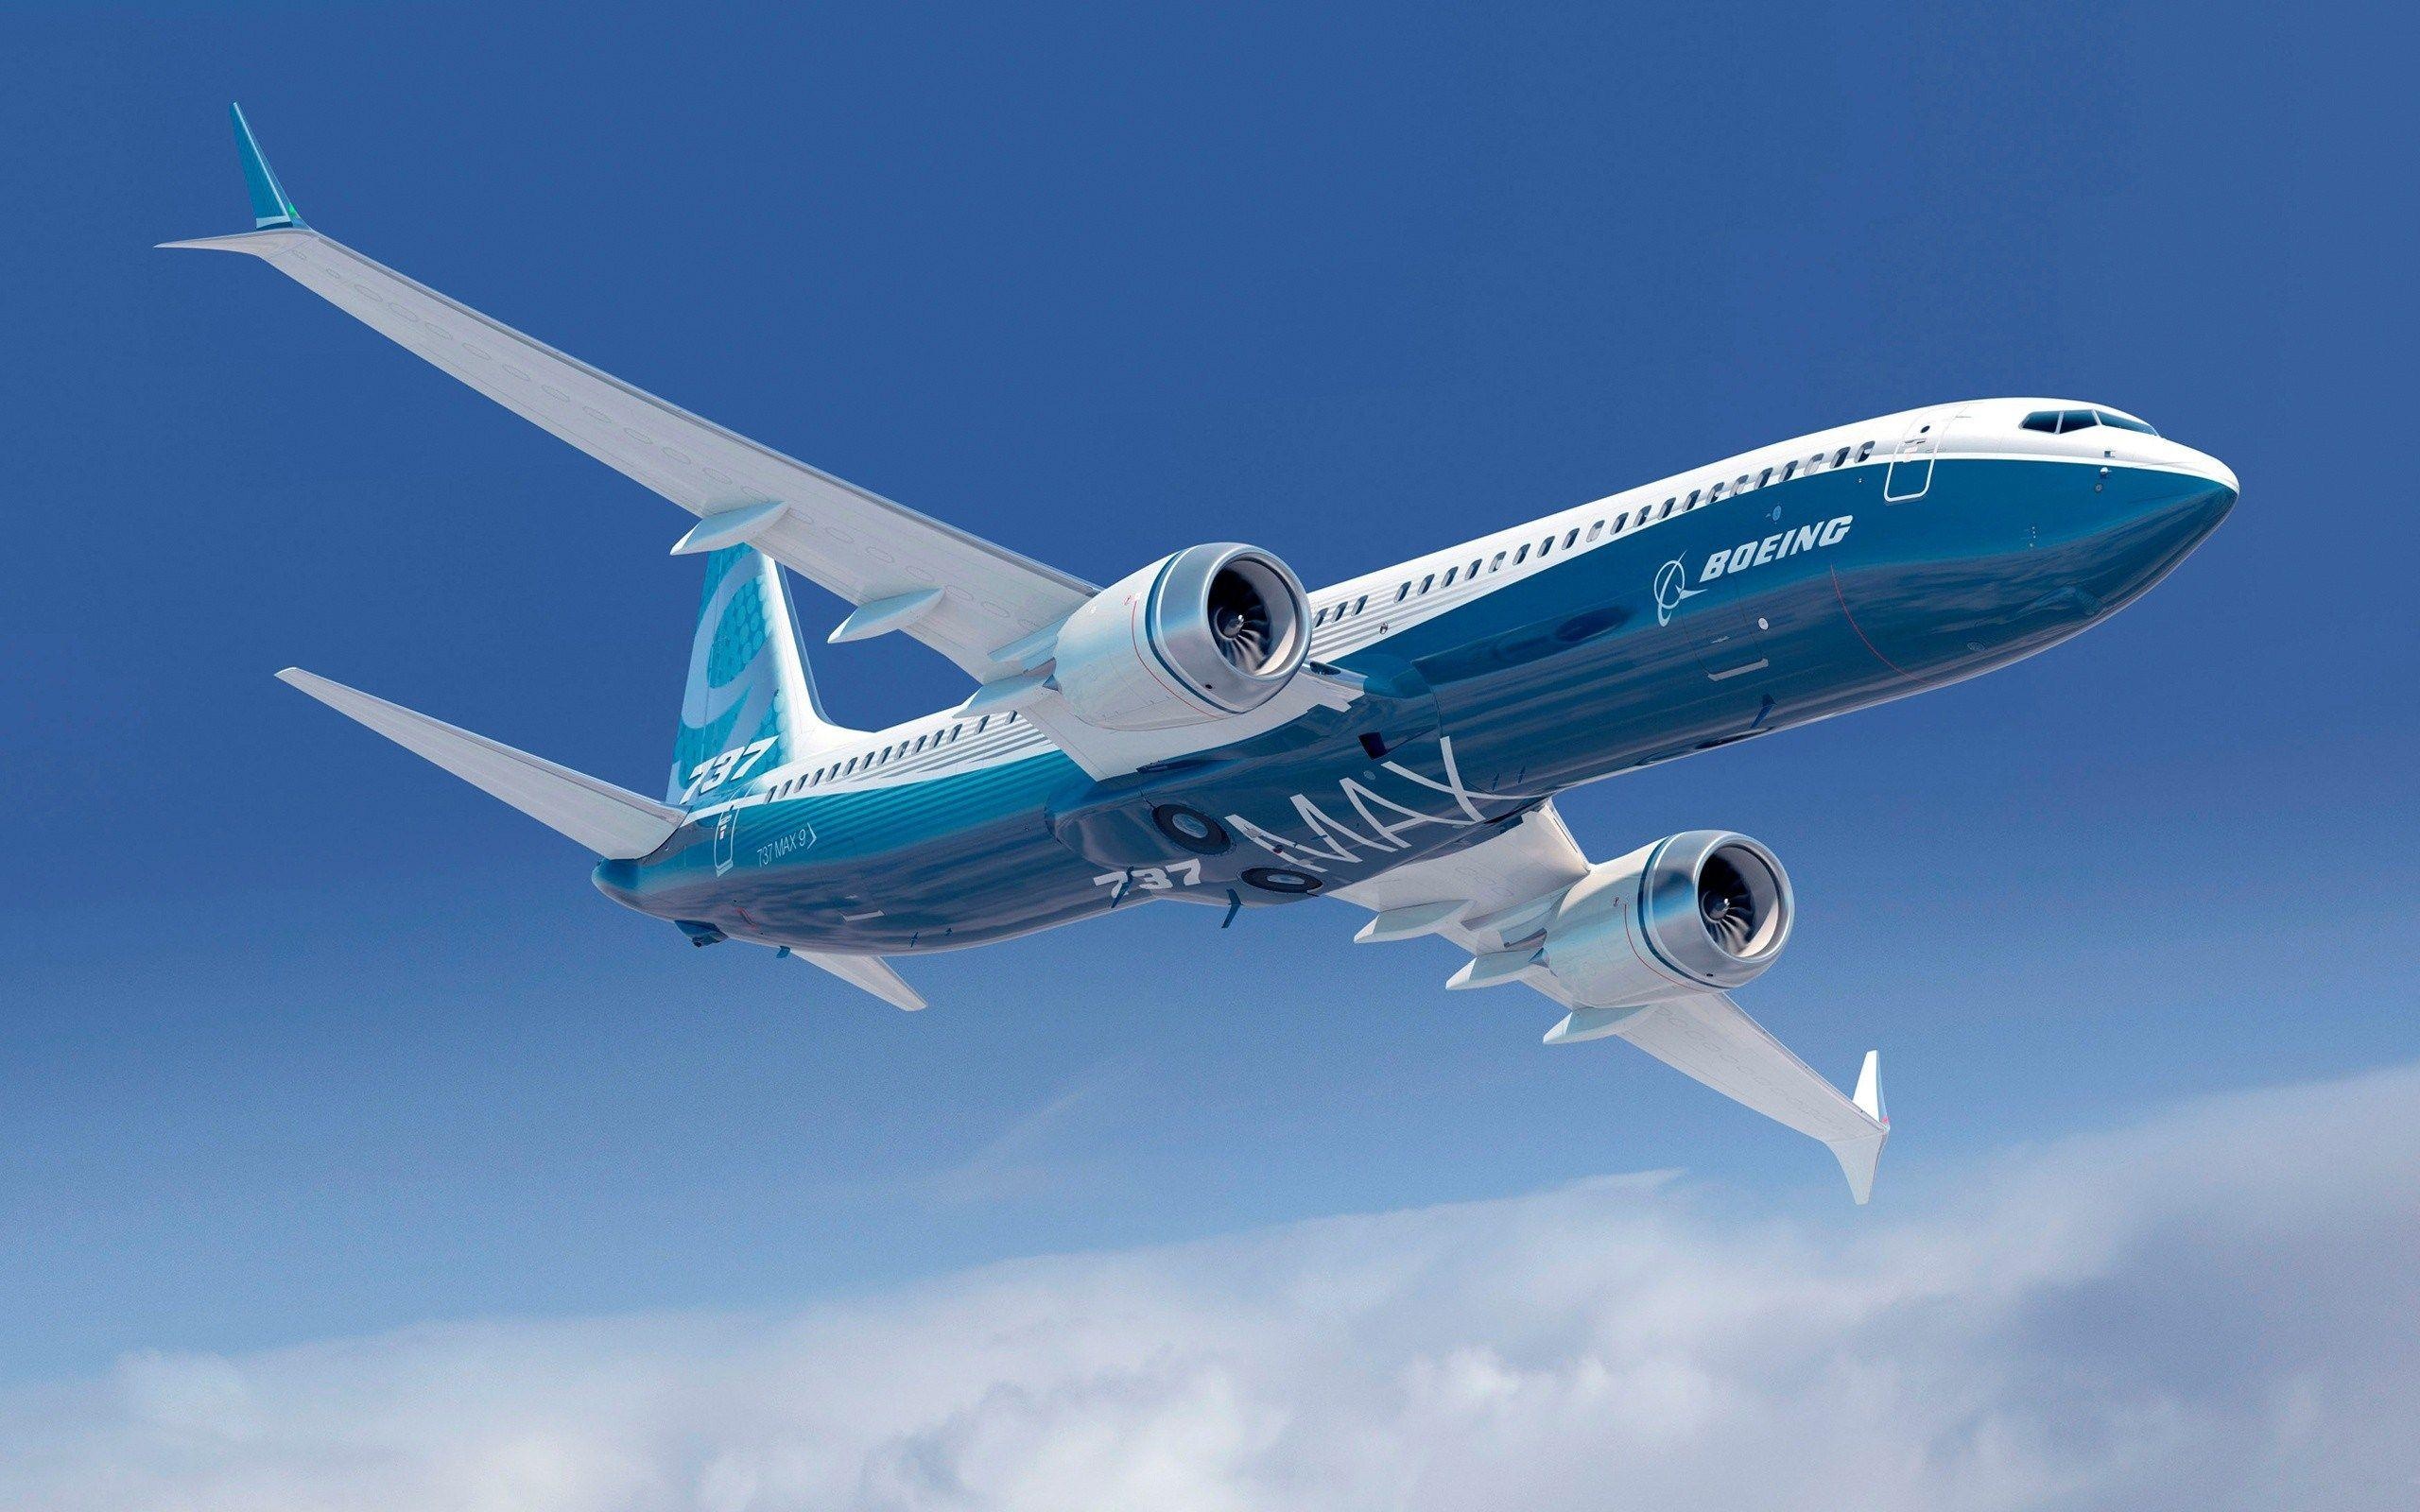 Boeing 737 Max Wallpapers - Top Free Boeing 737 Max Backgrounds 2560x1600